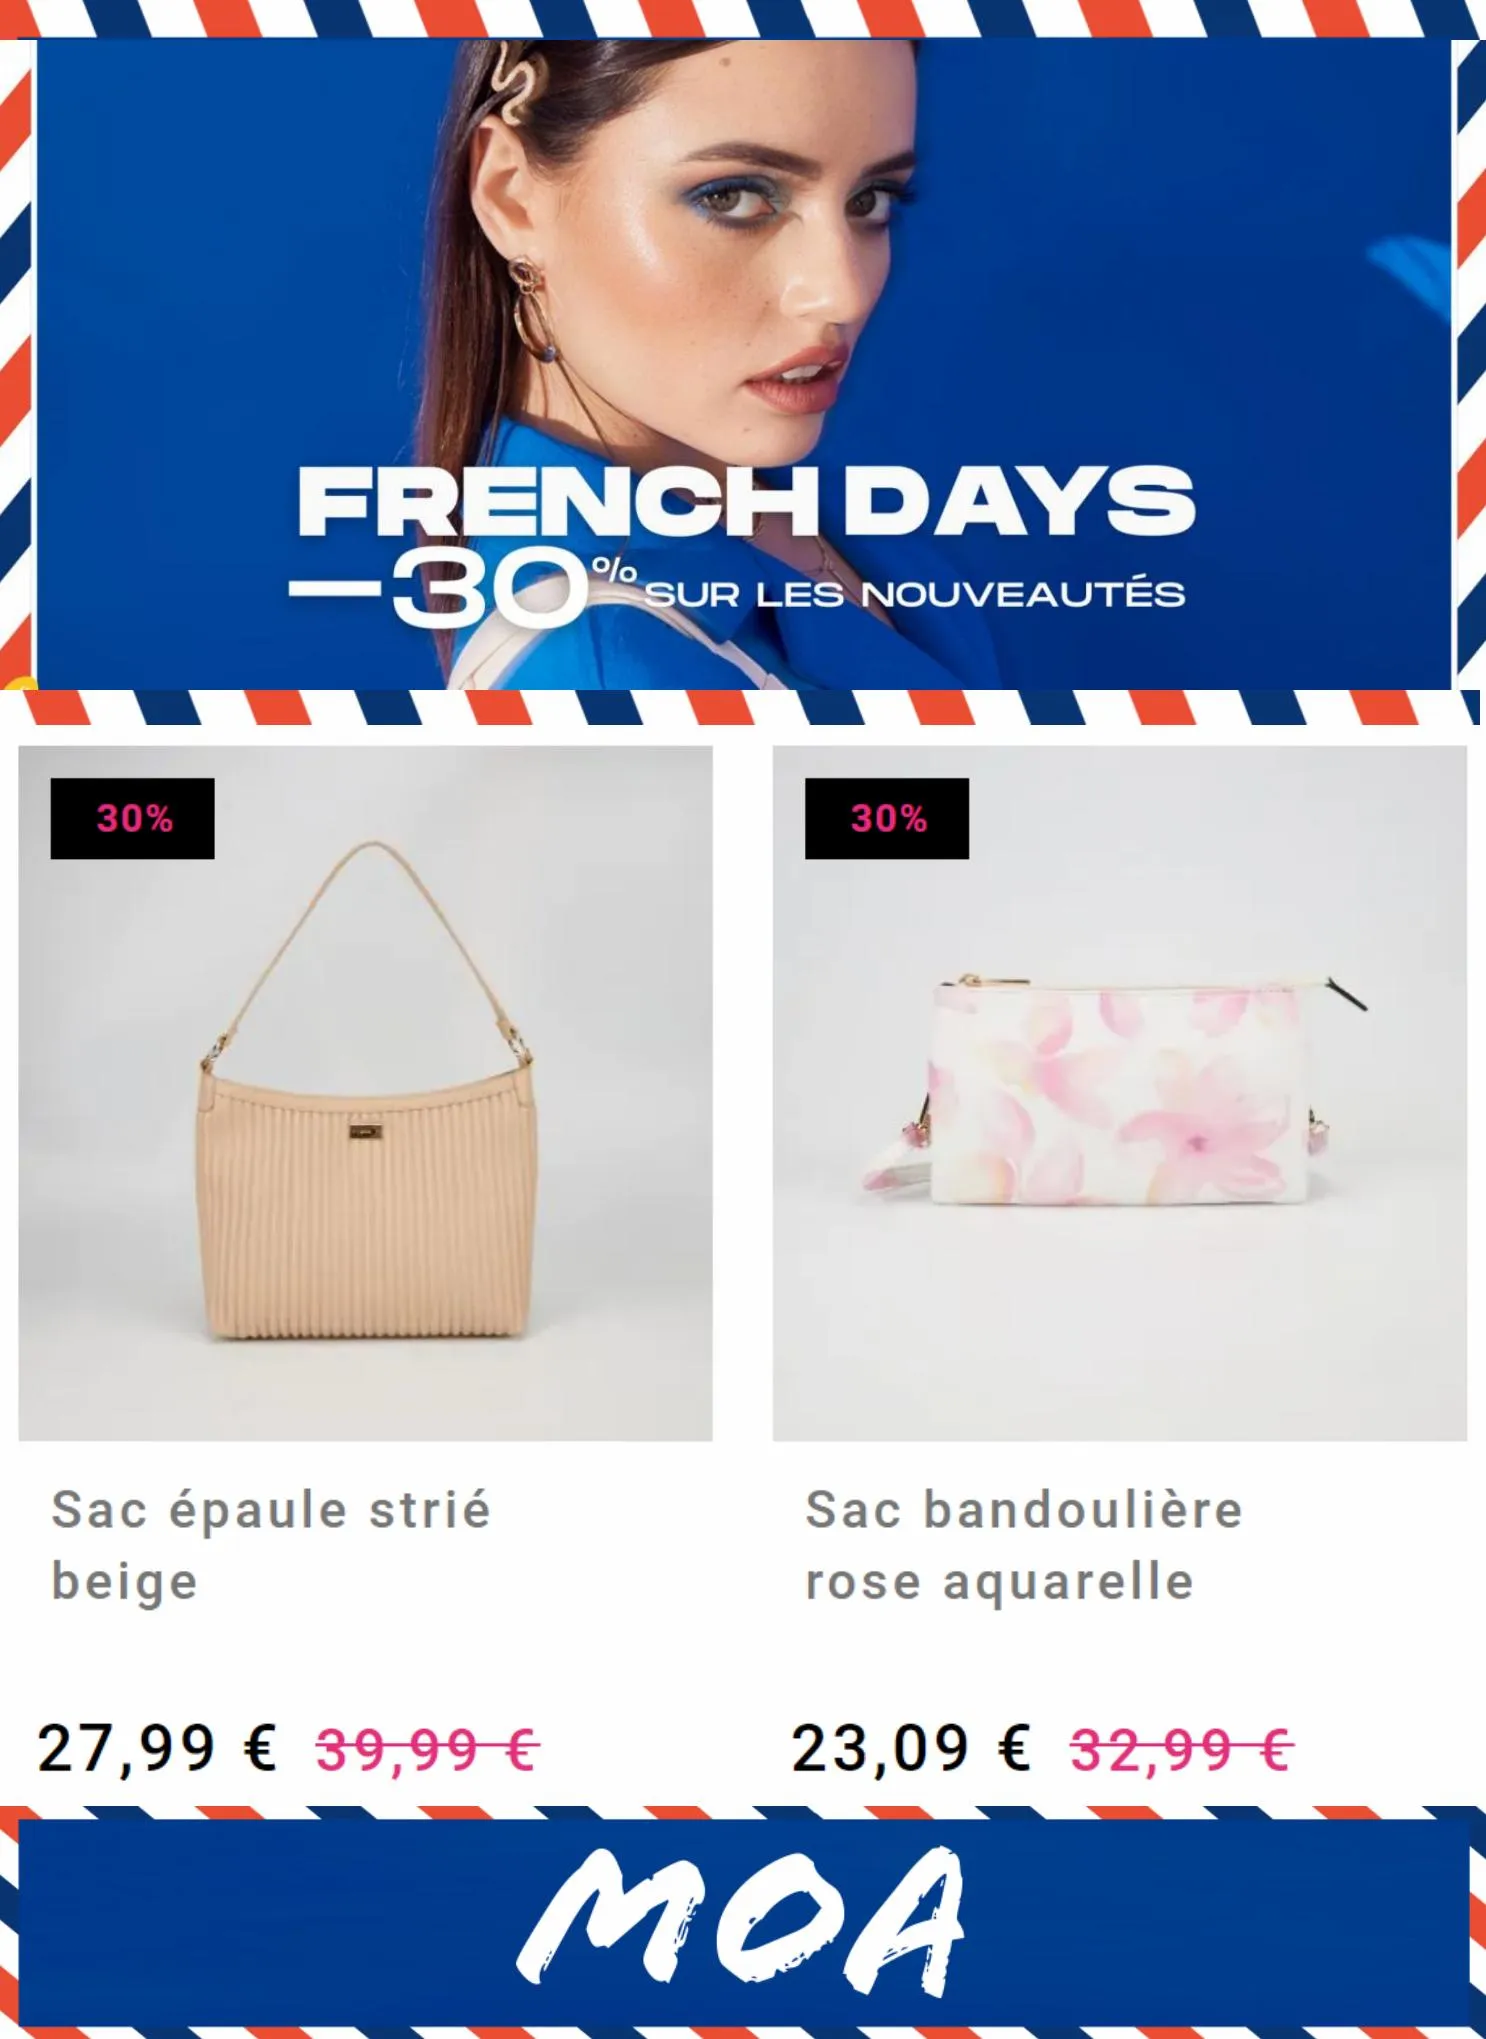 Catalogue French Days -30%*, page 00009